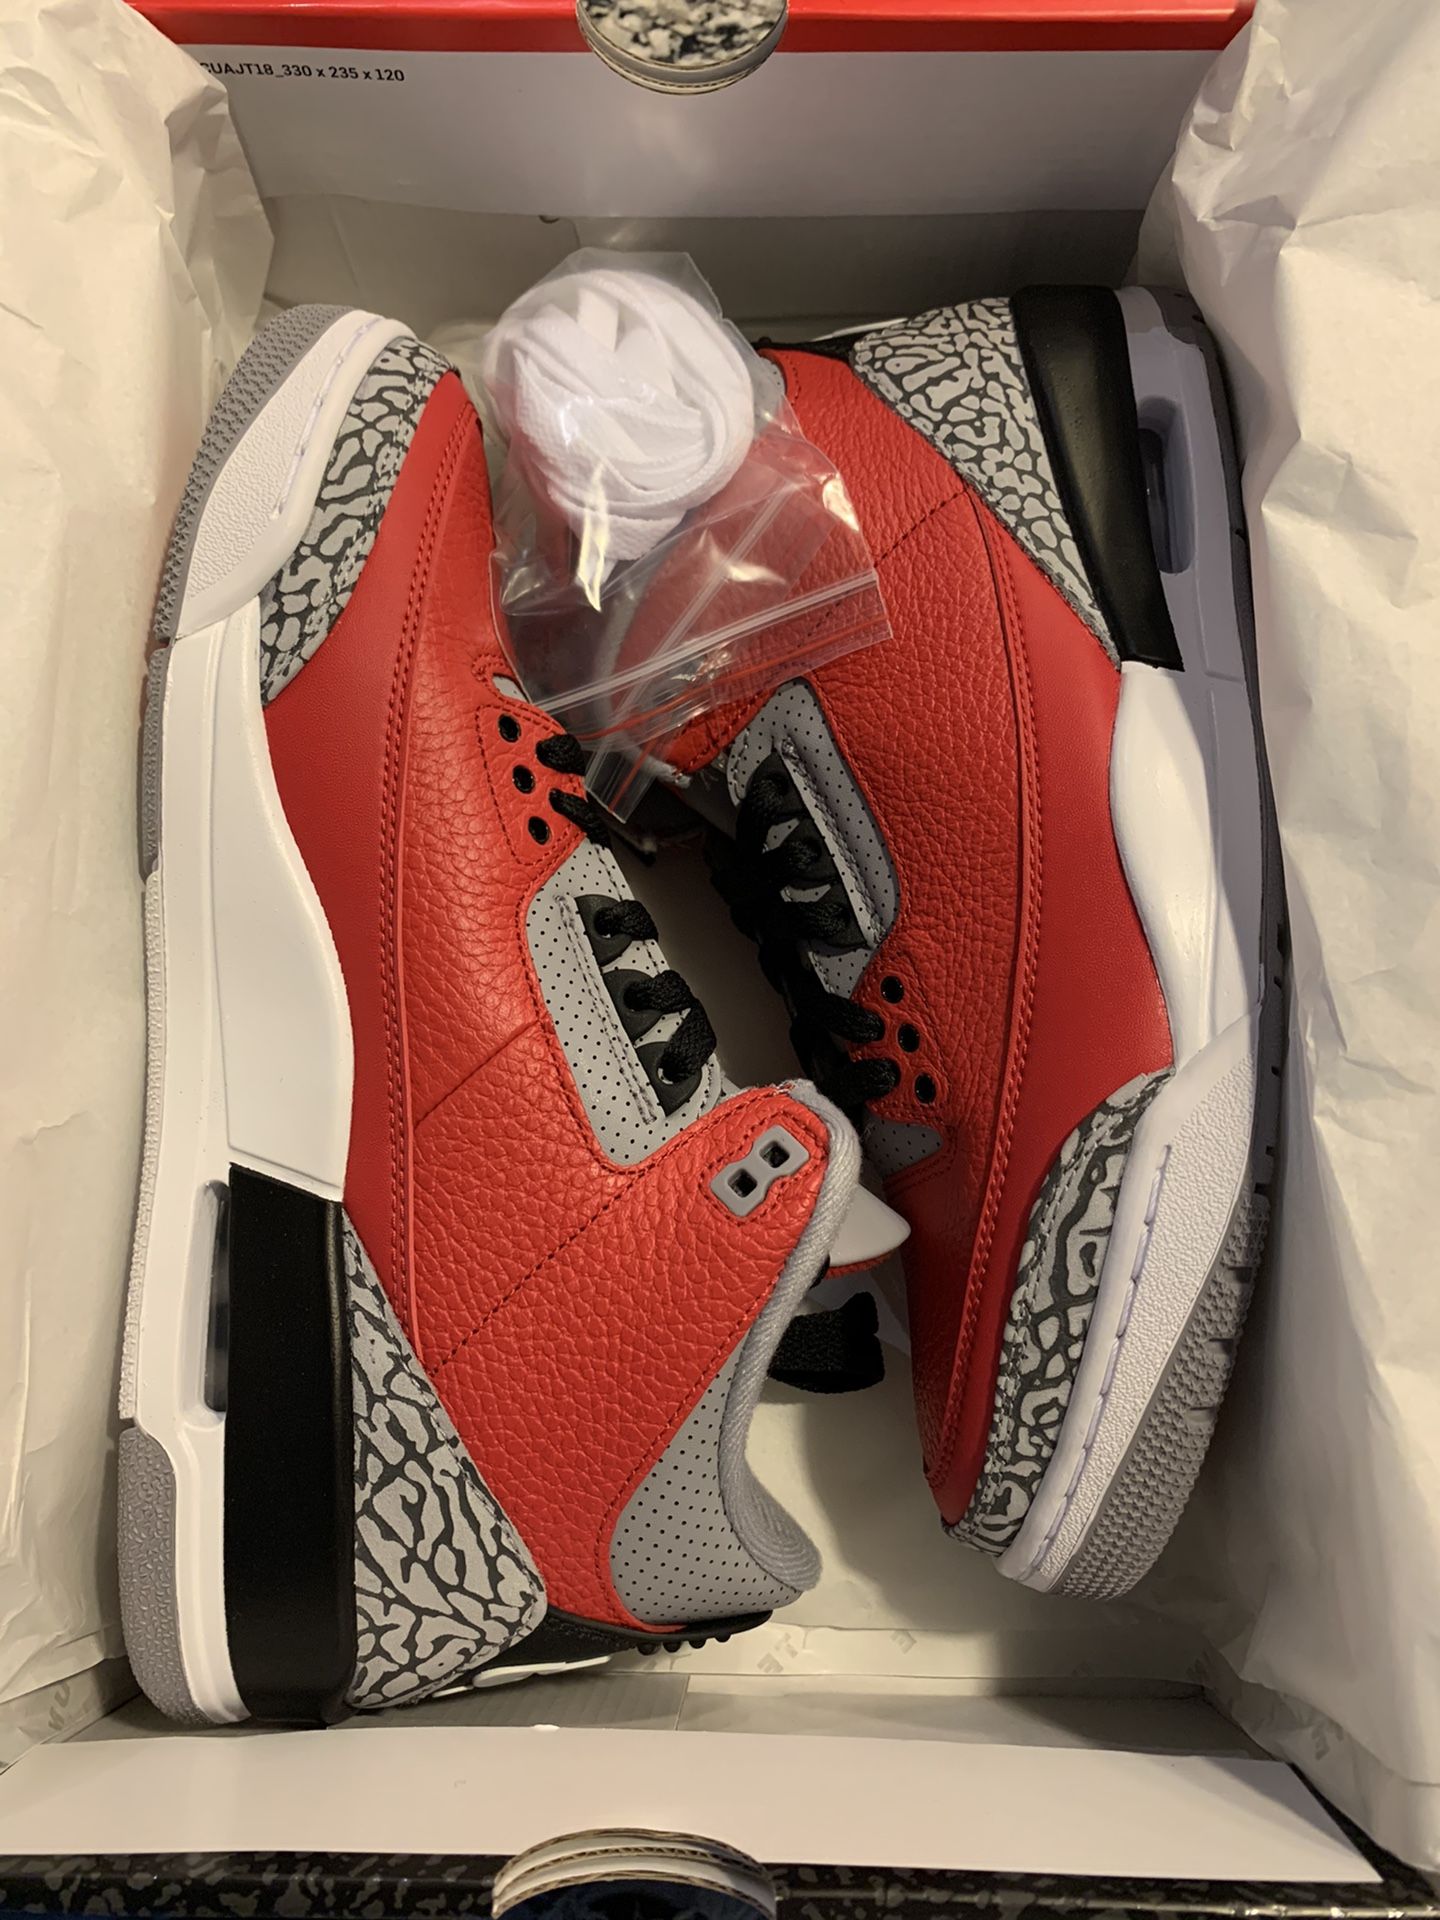 BRAND NEW! Nike Retro Air Jordan 3 Red Cement “Chi” edition size 8.5